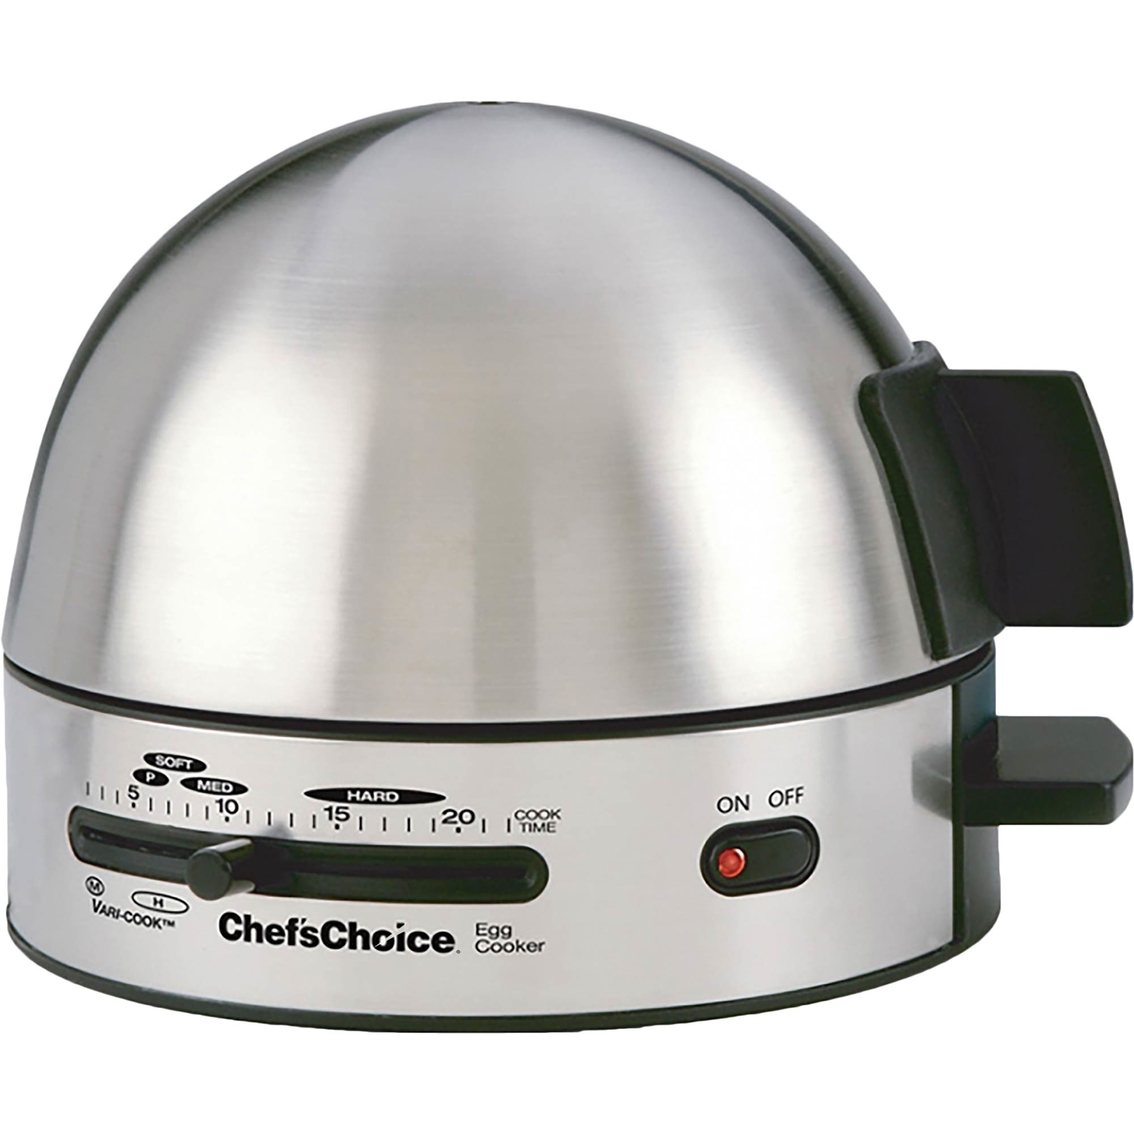 Chef's Choice Gourmet Egg Cooker - Image 1 of 6